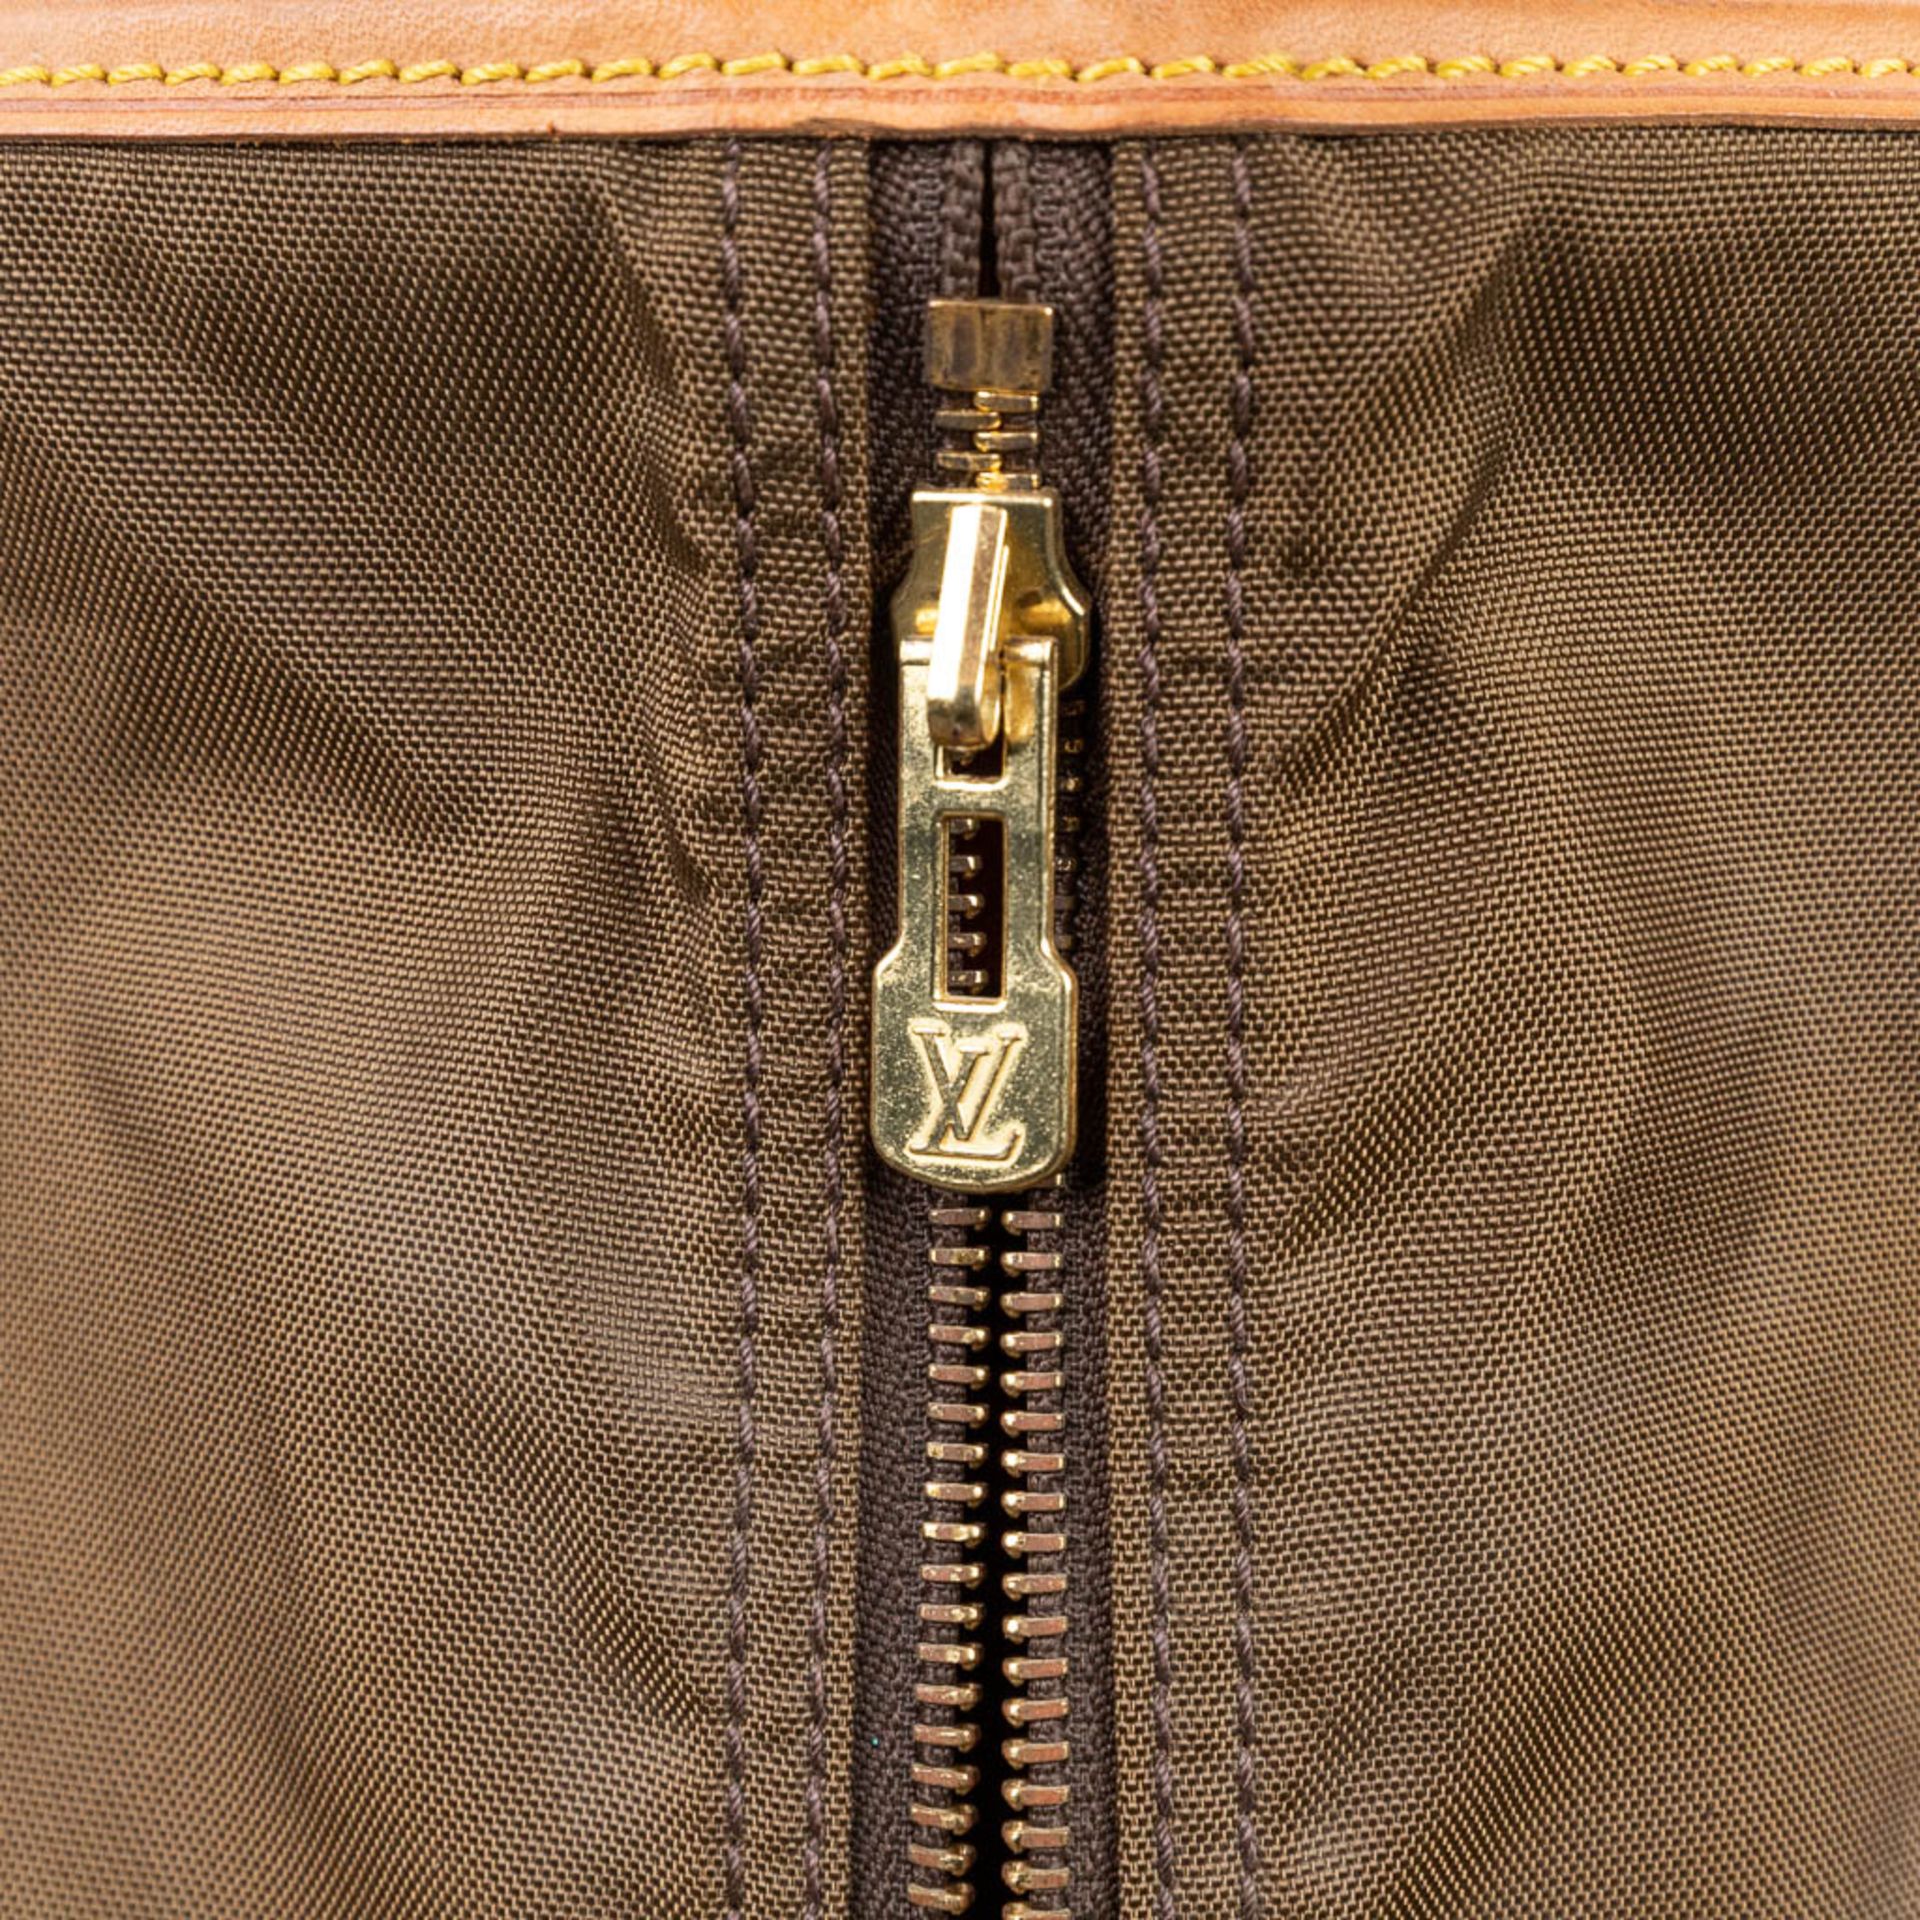 A garment suit traveller's bag made of leather by Louis Vuitton. (H:70cm) - Image 13 of 13